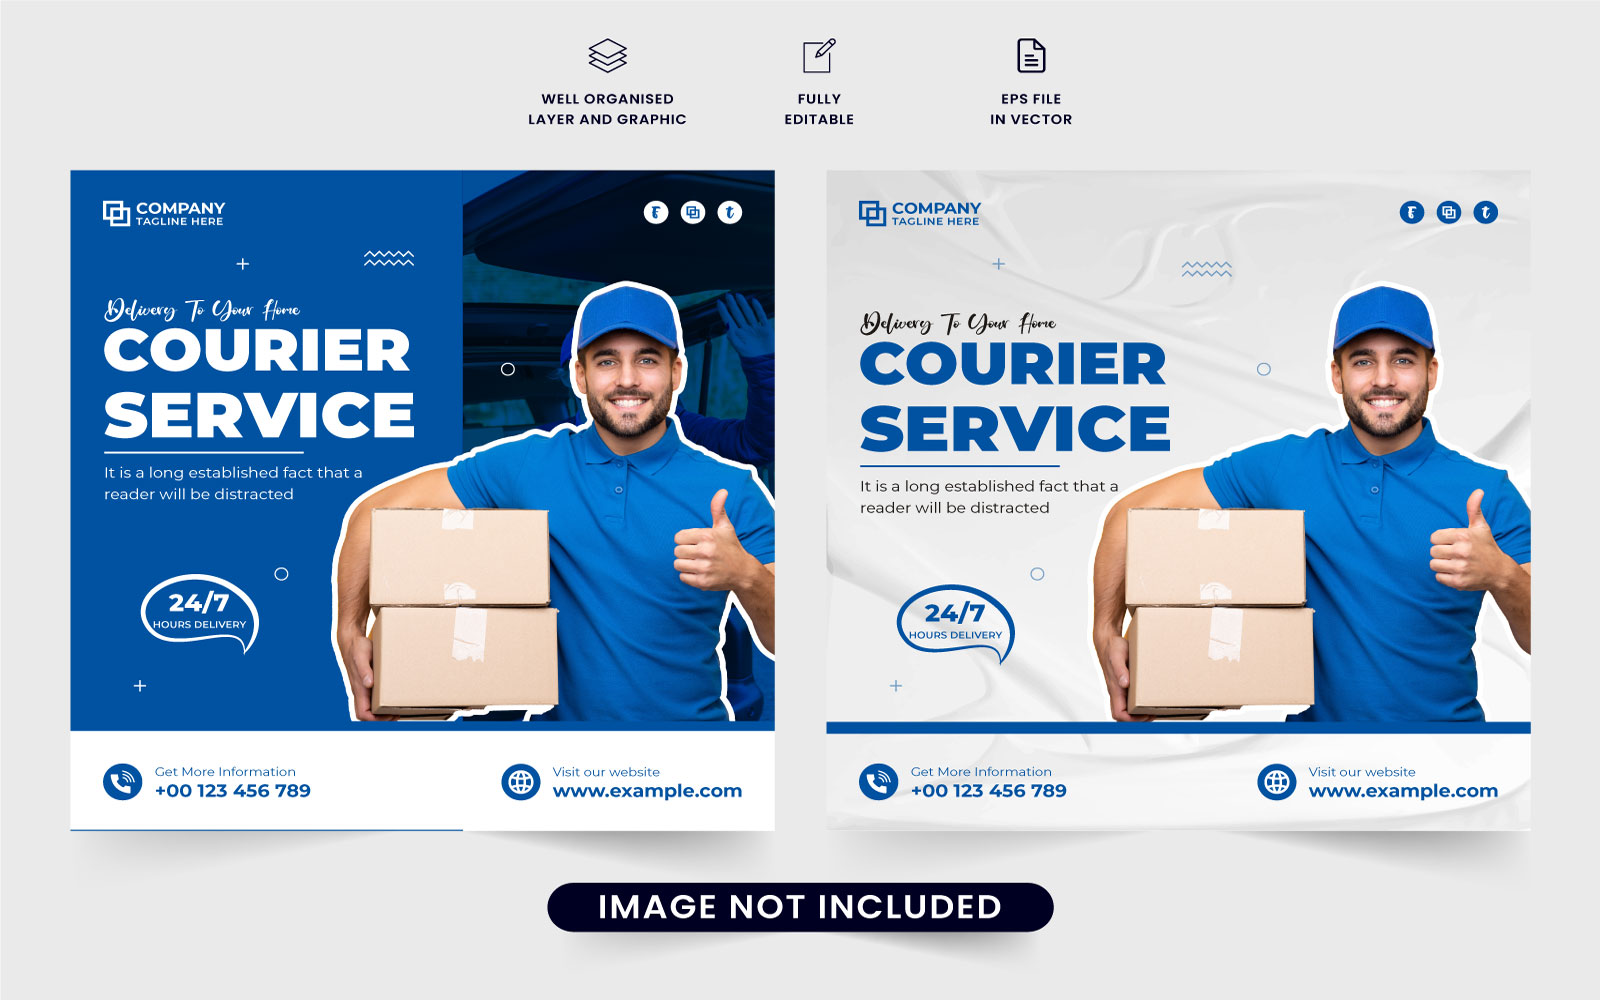 Online delivery service template vector